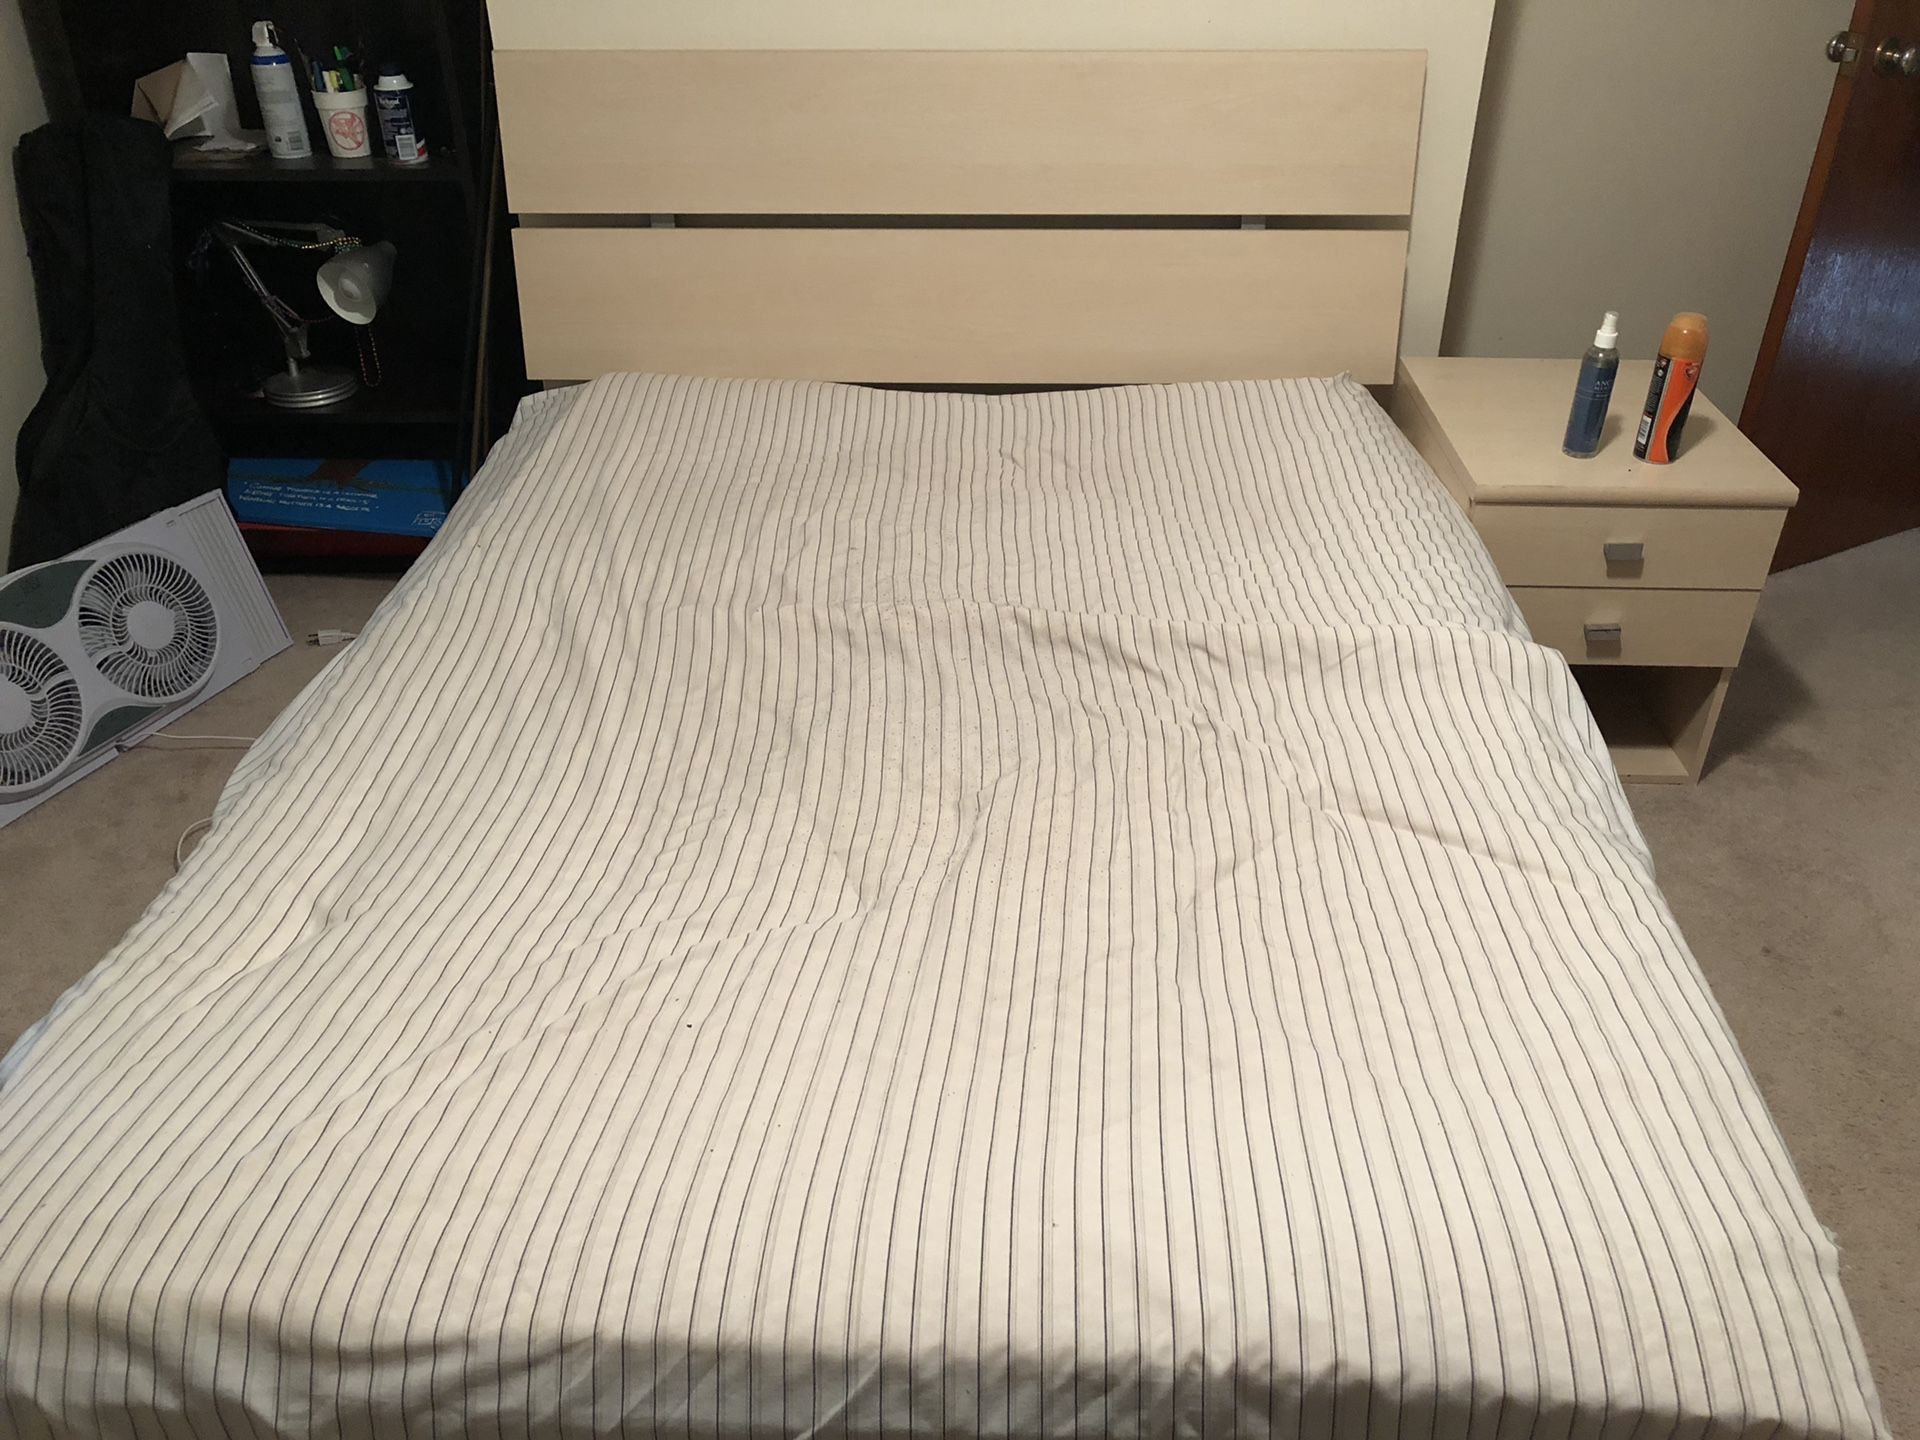 Full size bedframe with headboard, nightstand, tall dresser and tv stand for $250